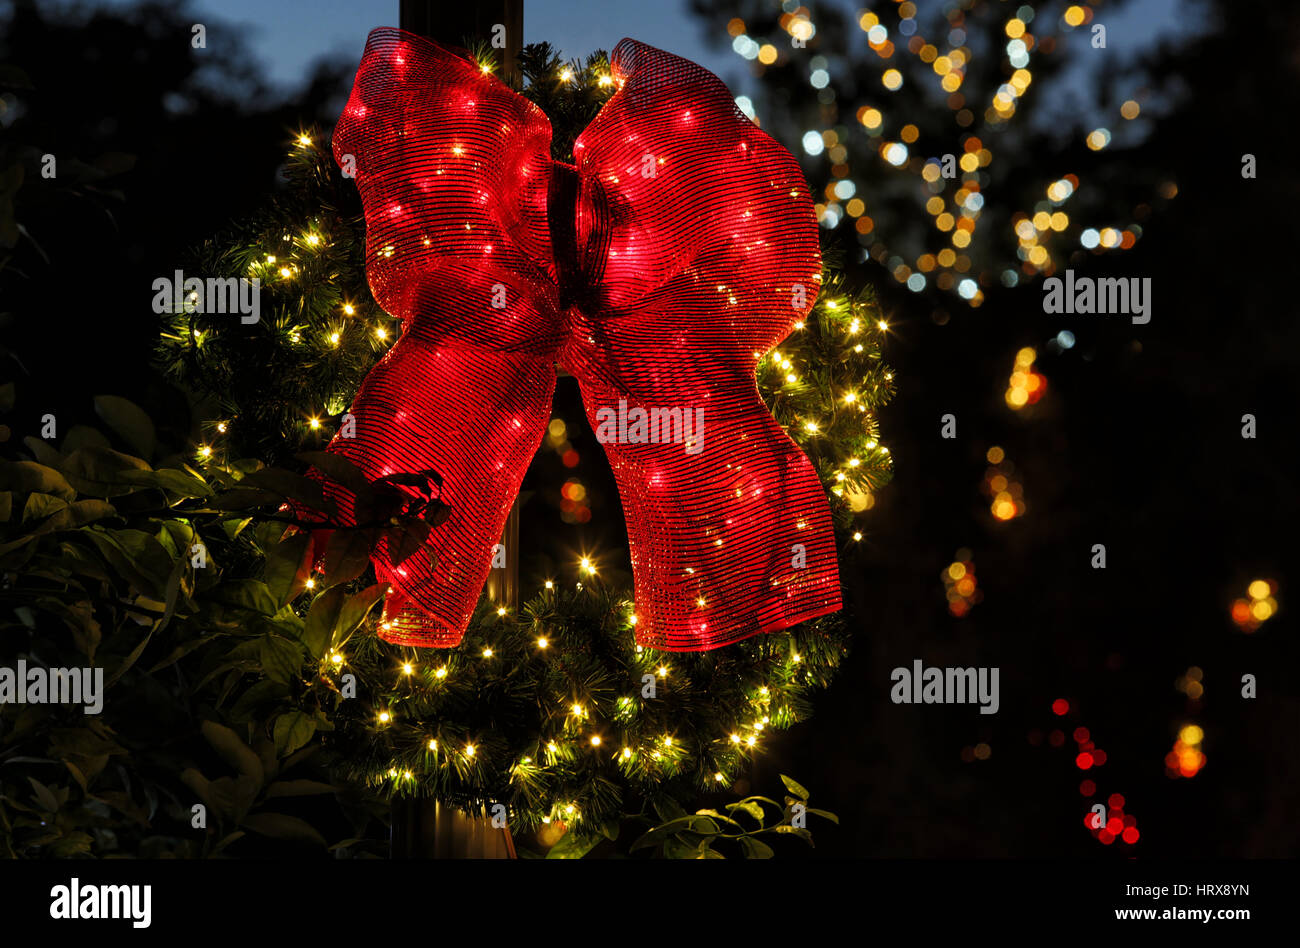 A lighted evergreen Christmas wreath, with a large red bow, displayed on a dark background with christmas lights in the background. Stock Photo